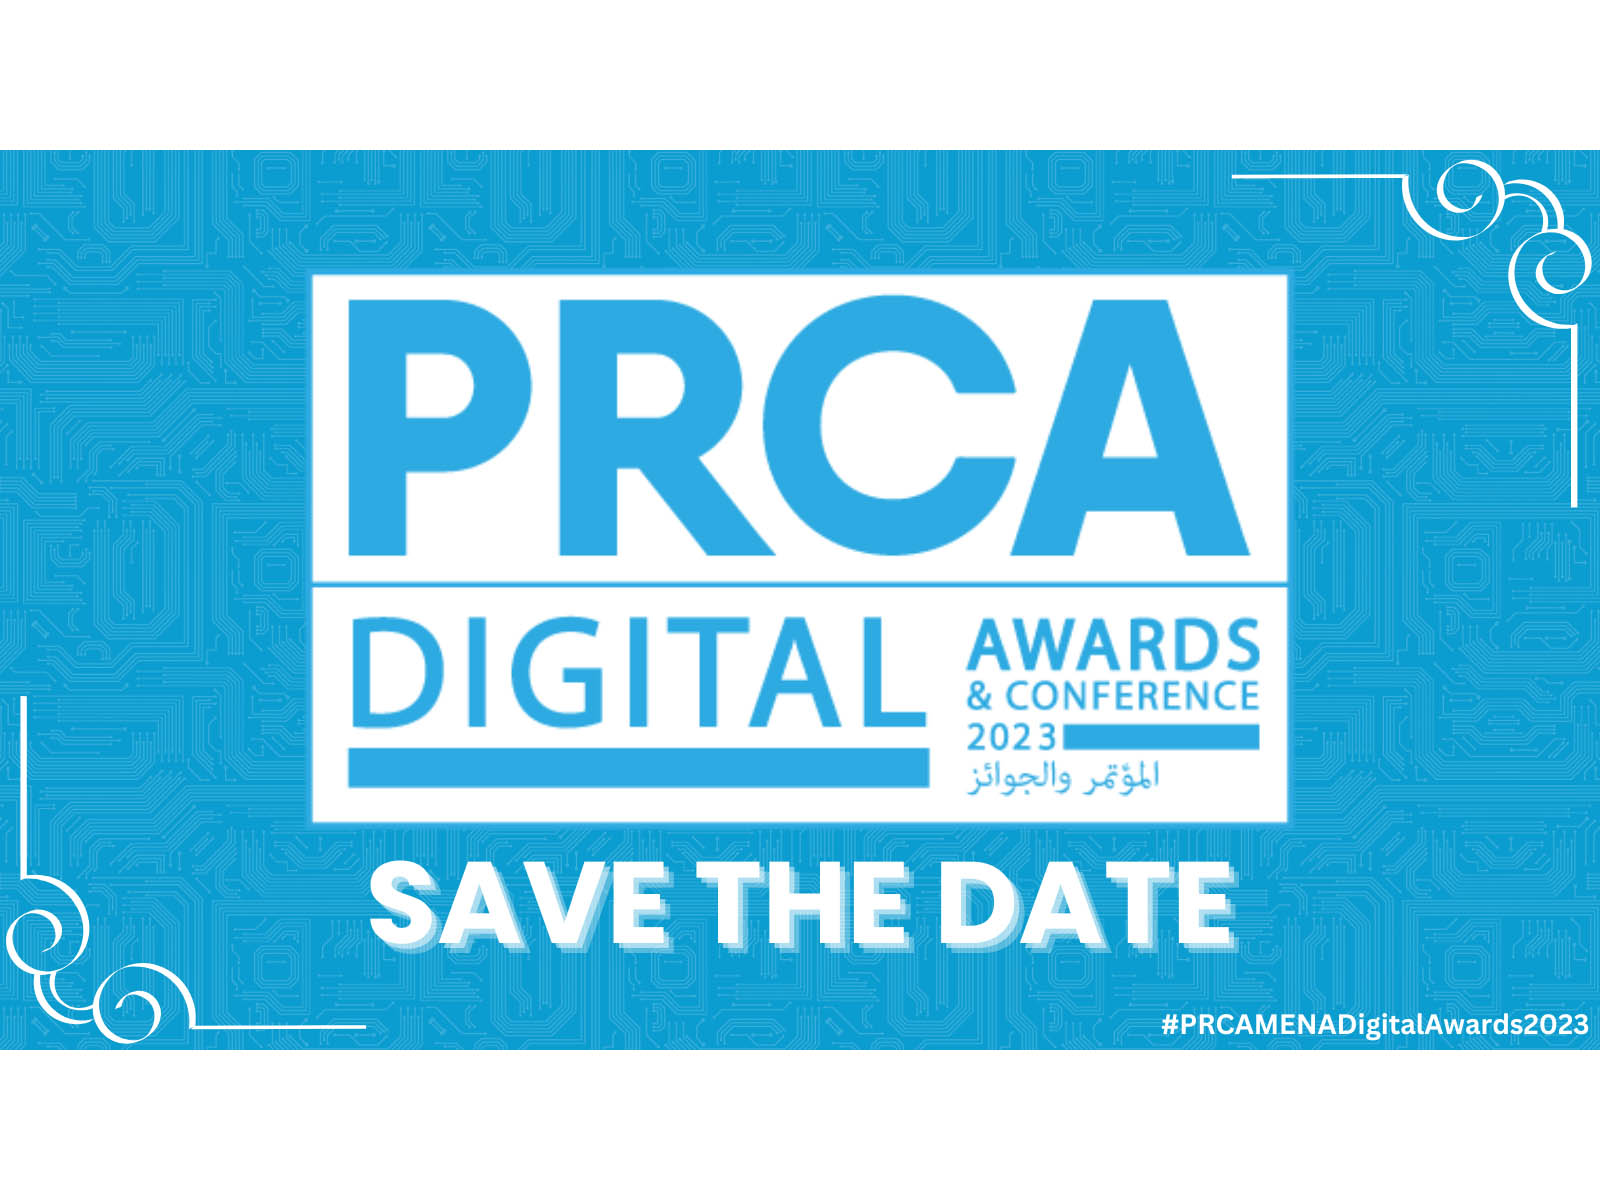 PRCA MENA announces its Conference and Digital Awards for 2023 